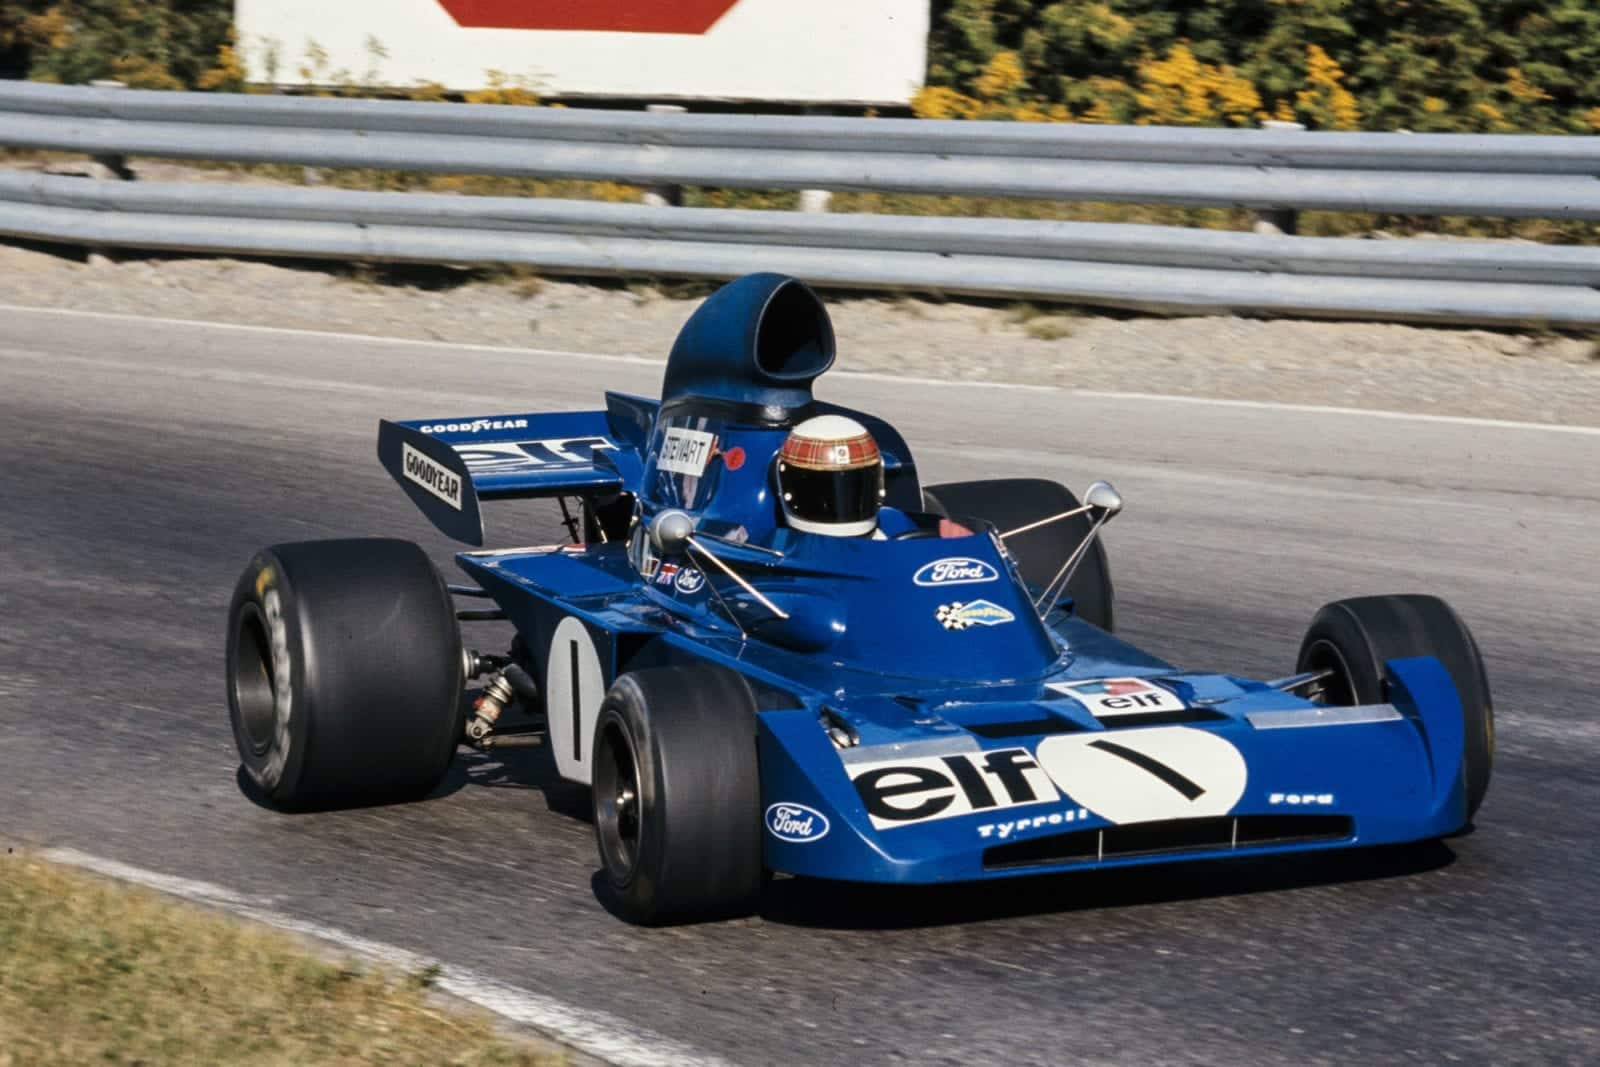 Jackie Stewart driving for Tyrrell at the 1972 Canadian Grand Prix